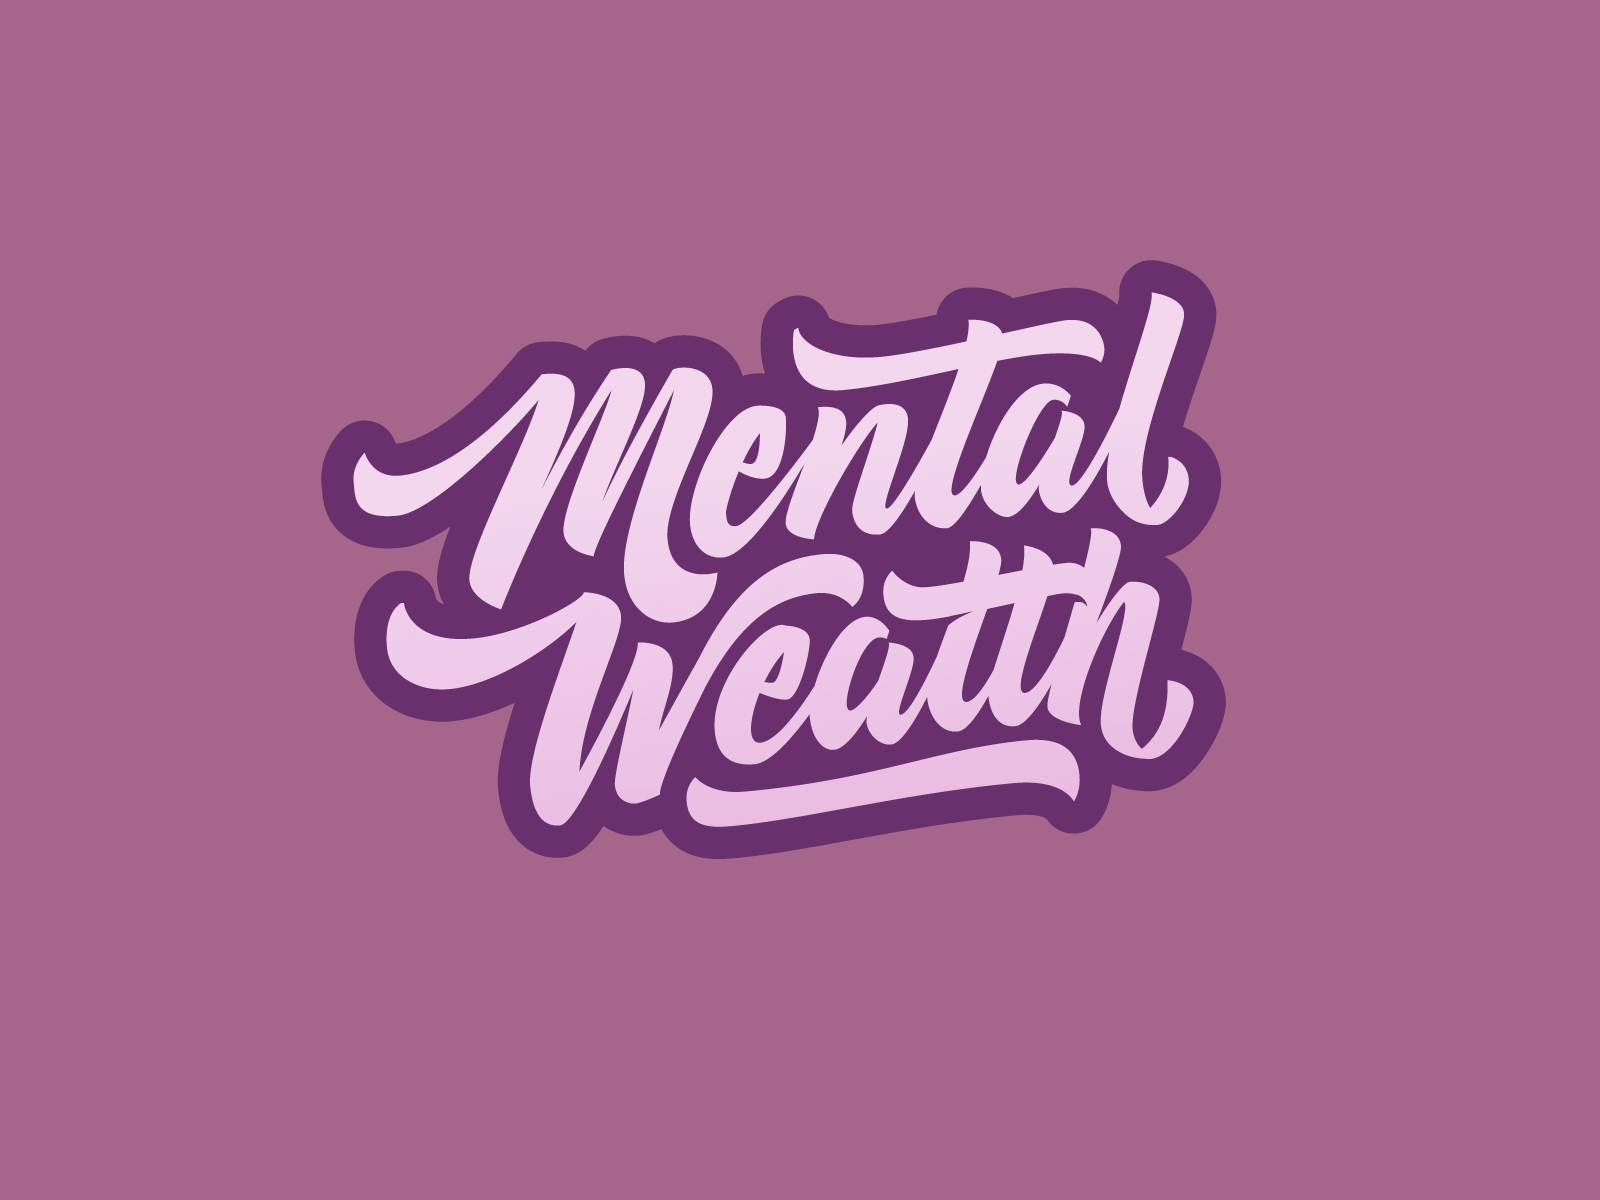 Mental Wealth by Rich Lim on Dribbble